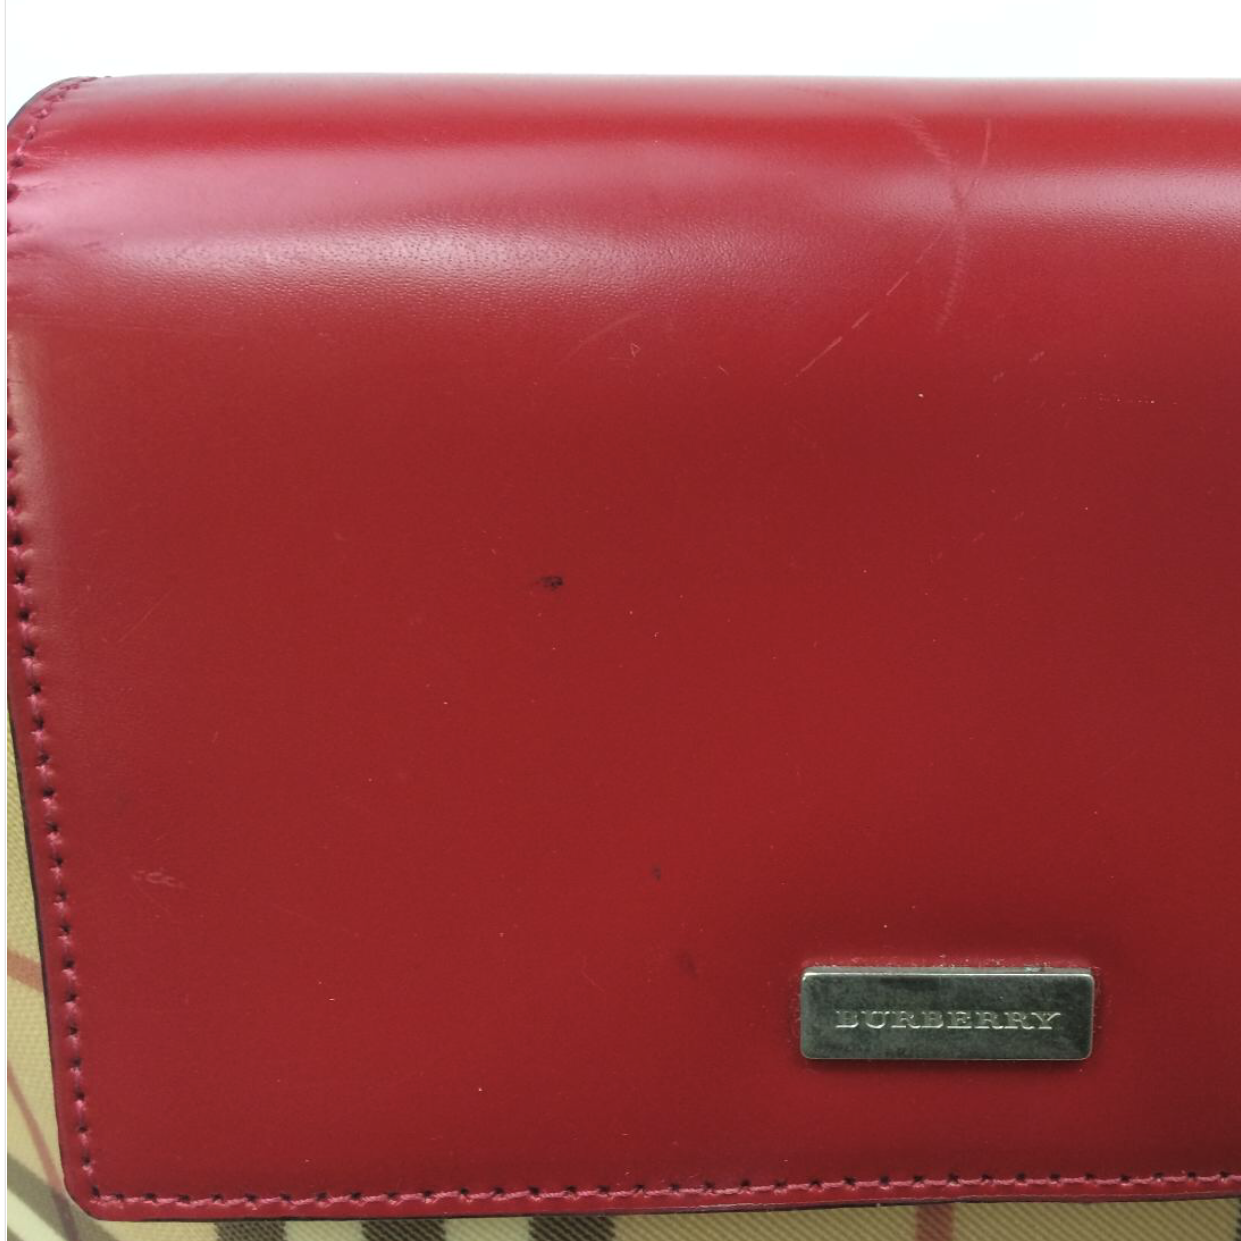 Burberry, Bags, Burberry Red Plaid Wallet Rare